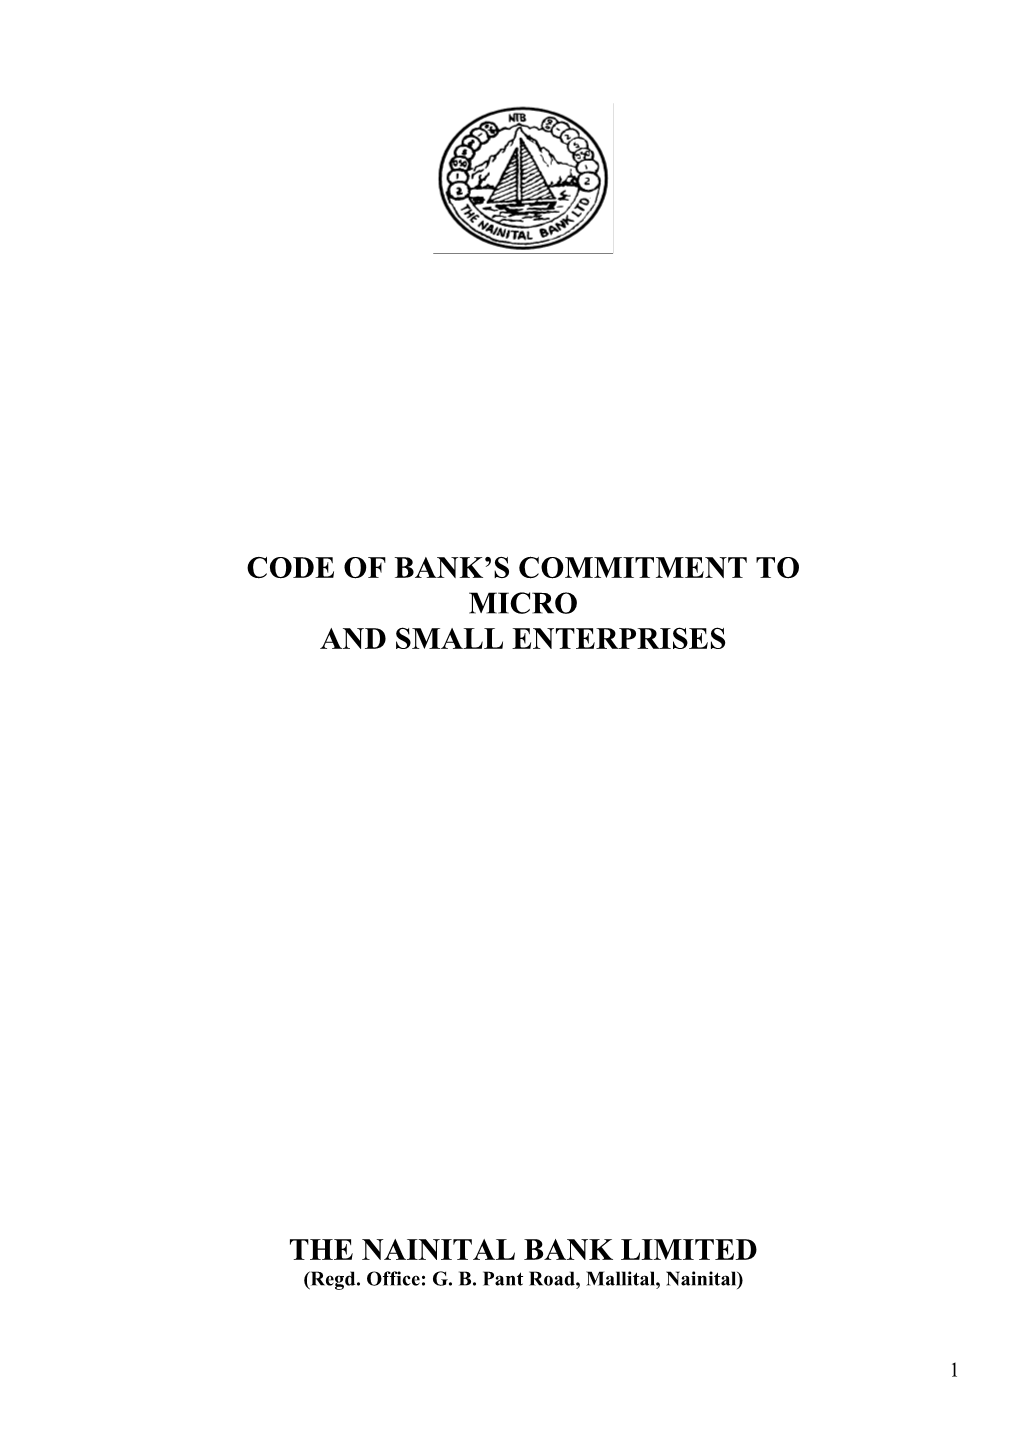 Code of Bank's Commitment To